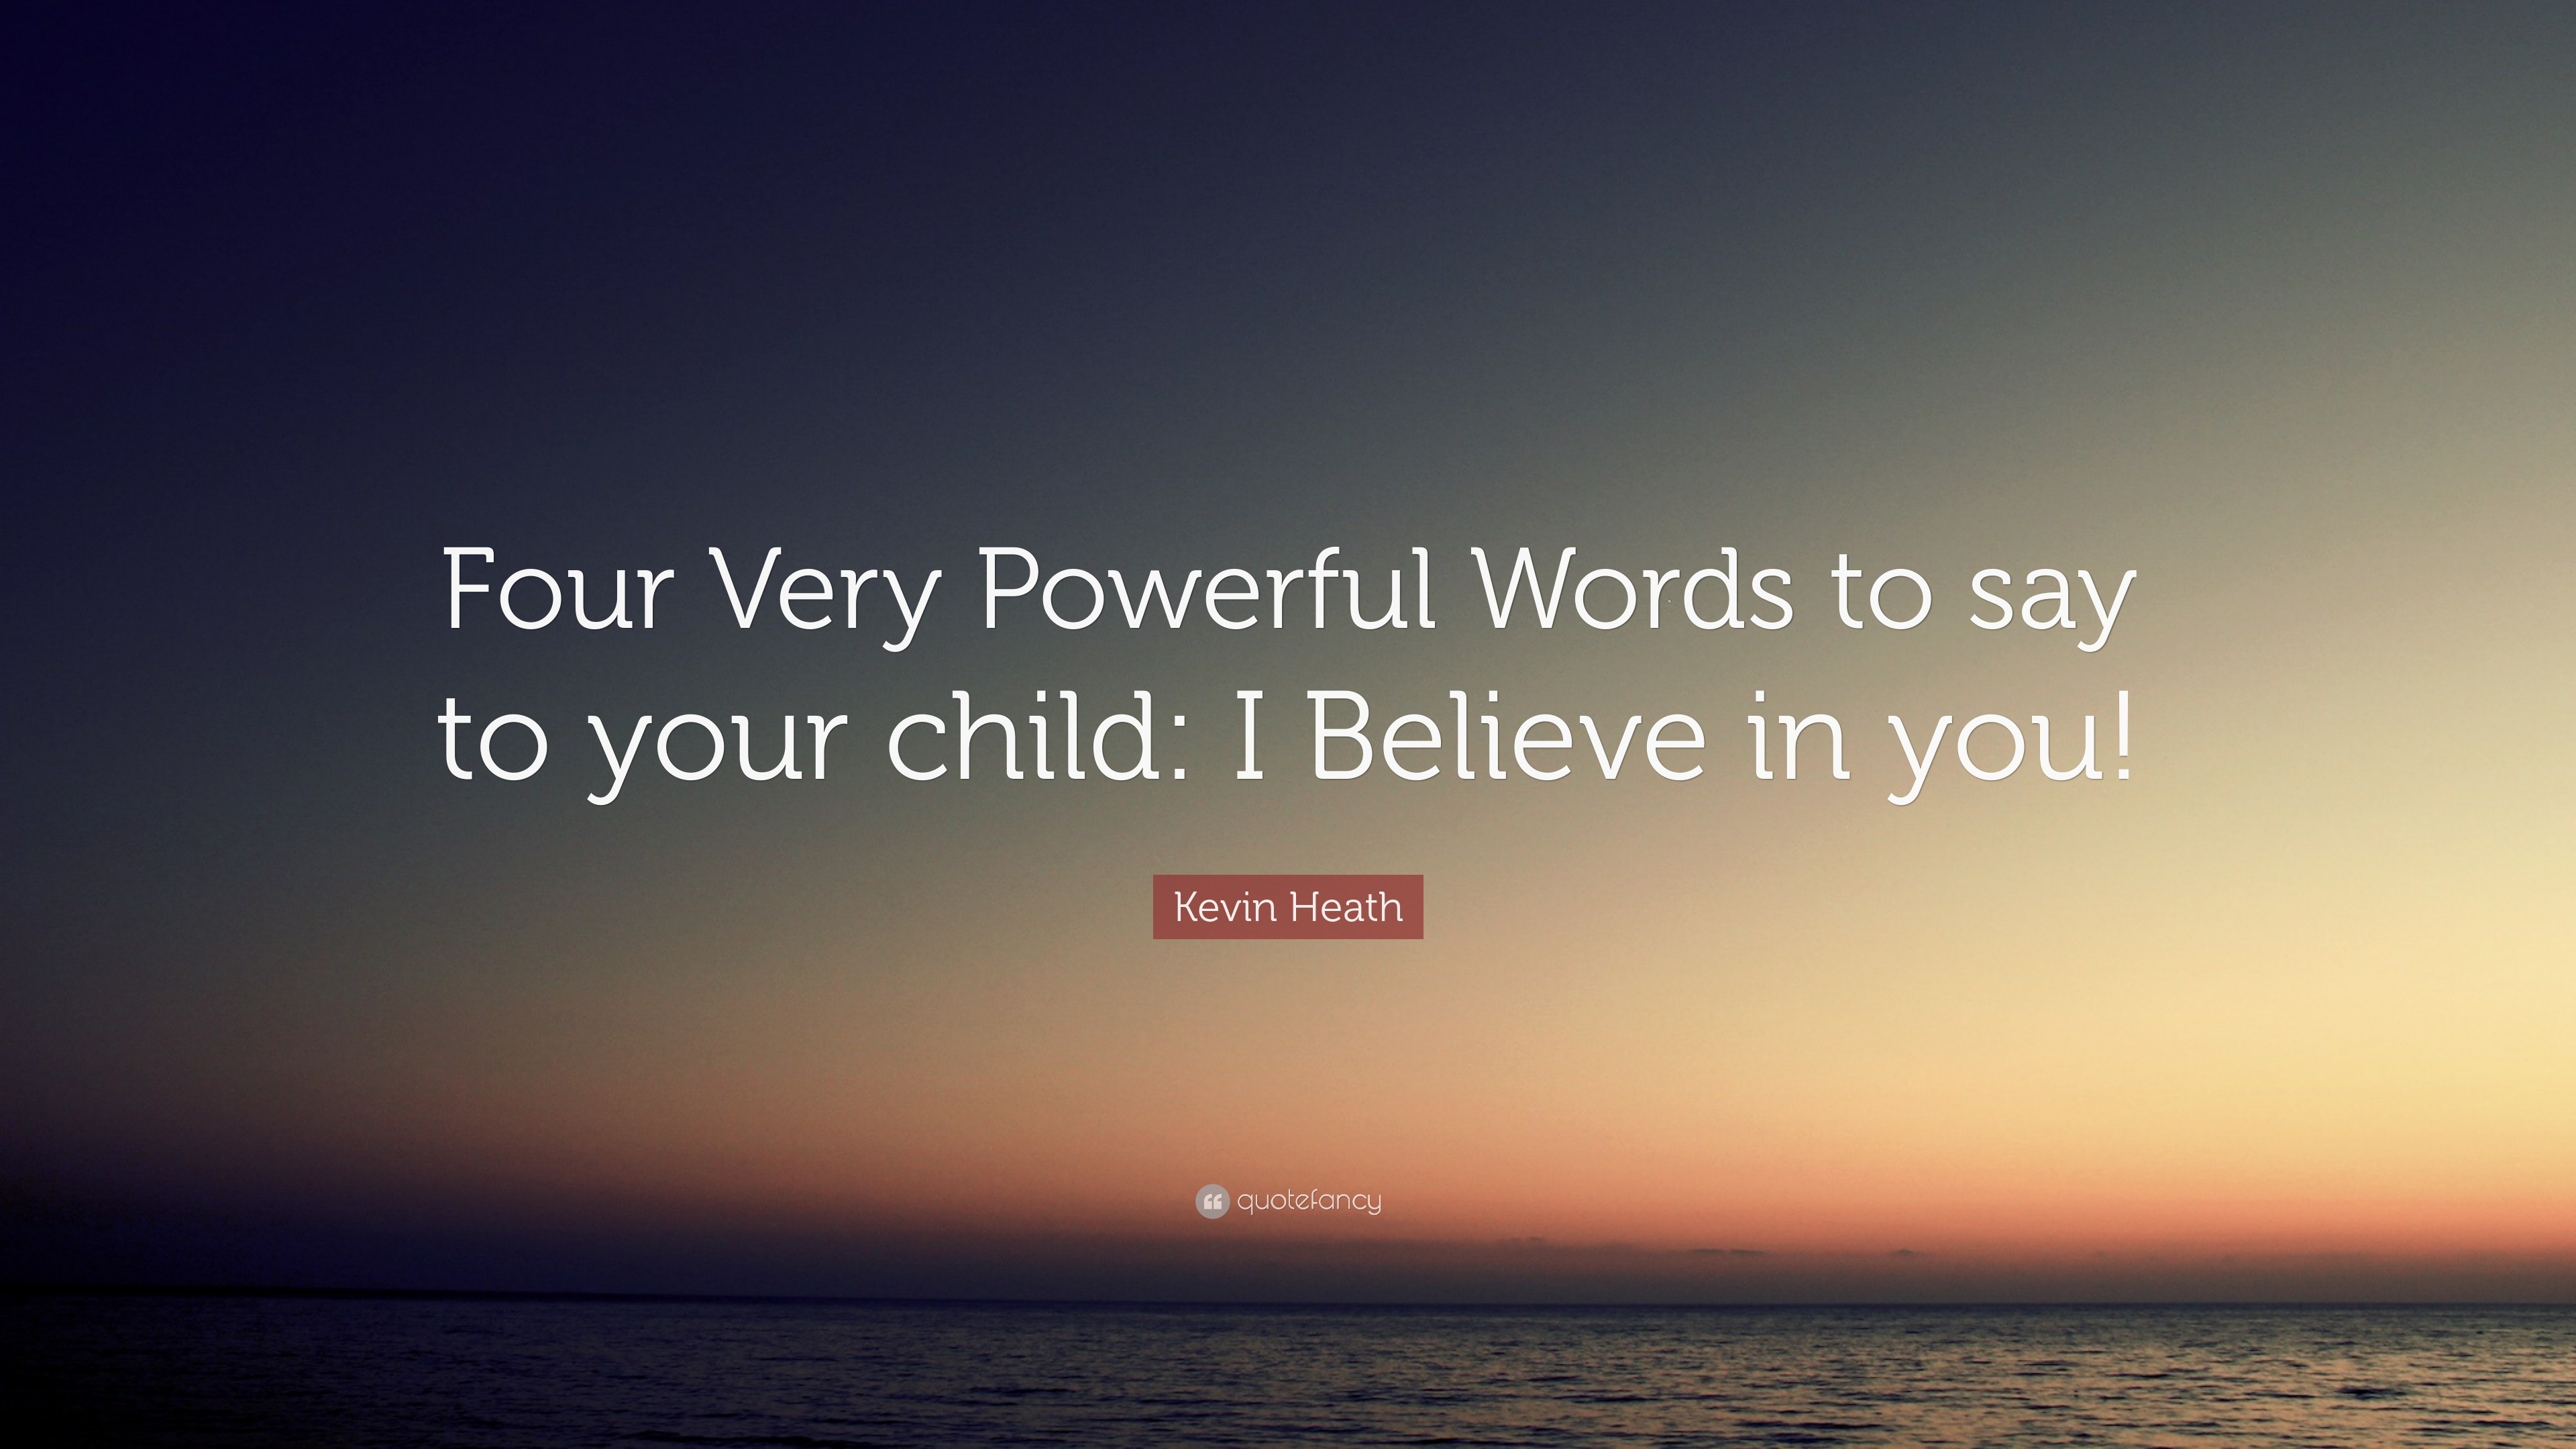 https://quotefancy.com/media/wallpaper/3840x2160/1912183-Kevin-Heath-Quote-Four-Very-Powerful-Words-to-say-to-your-child-I.jpg